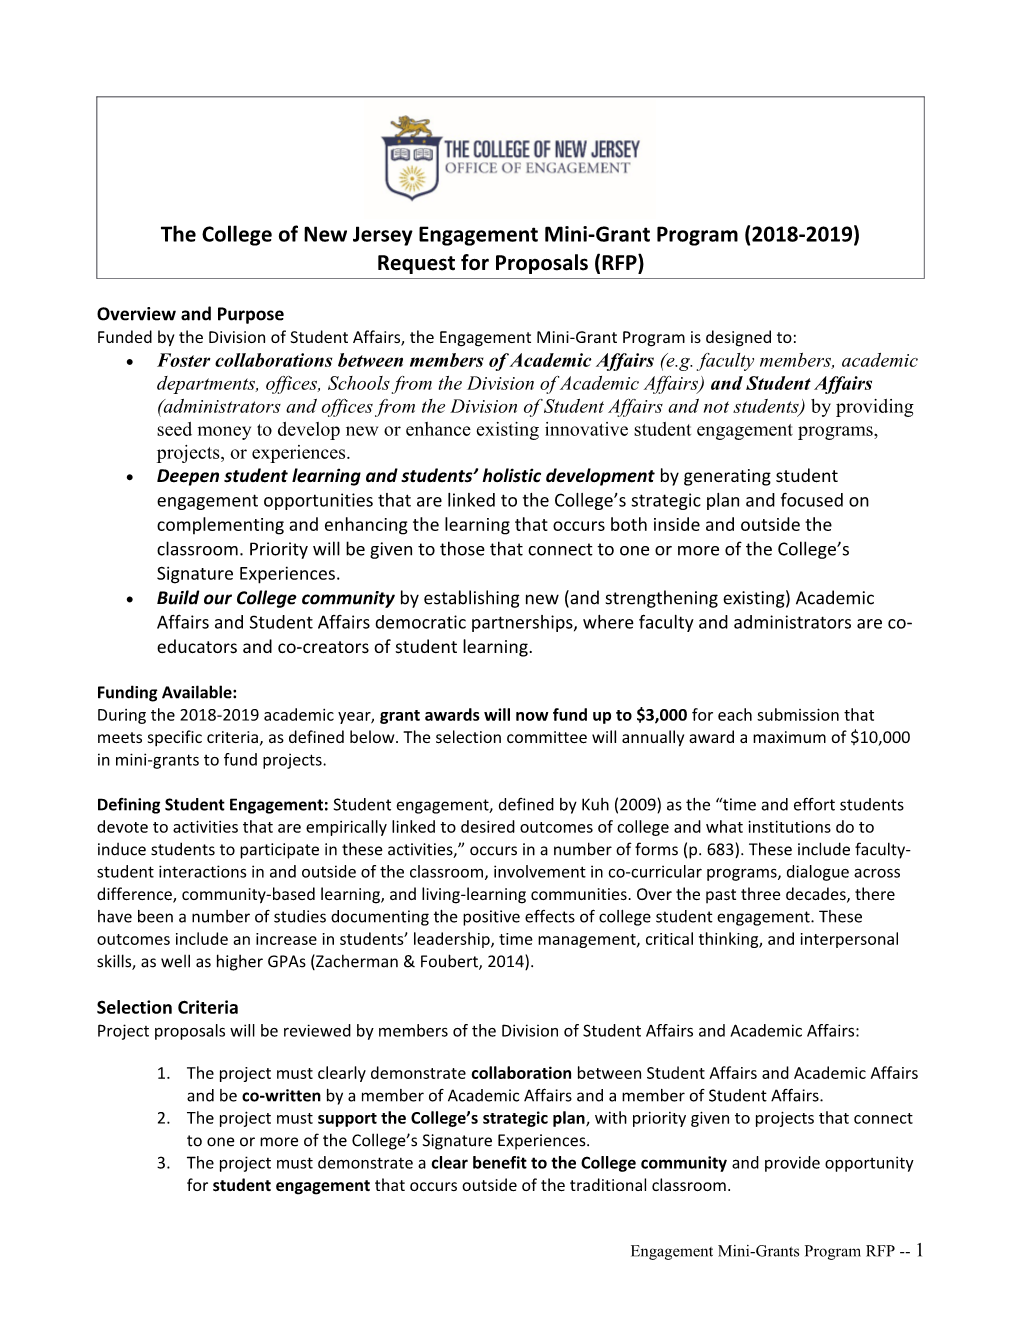 The College of New Jersey Engagement Mini-Grant Program (2018-2019)